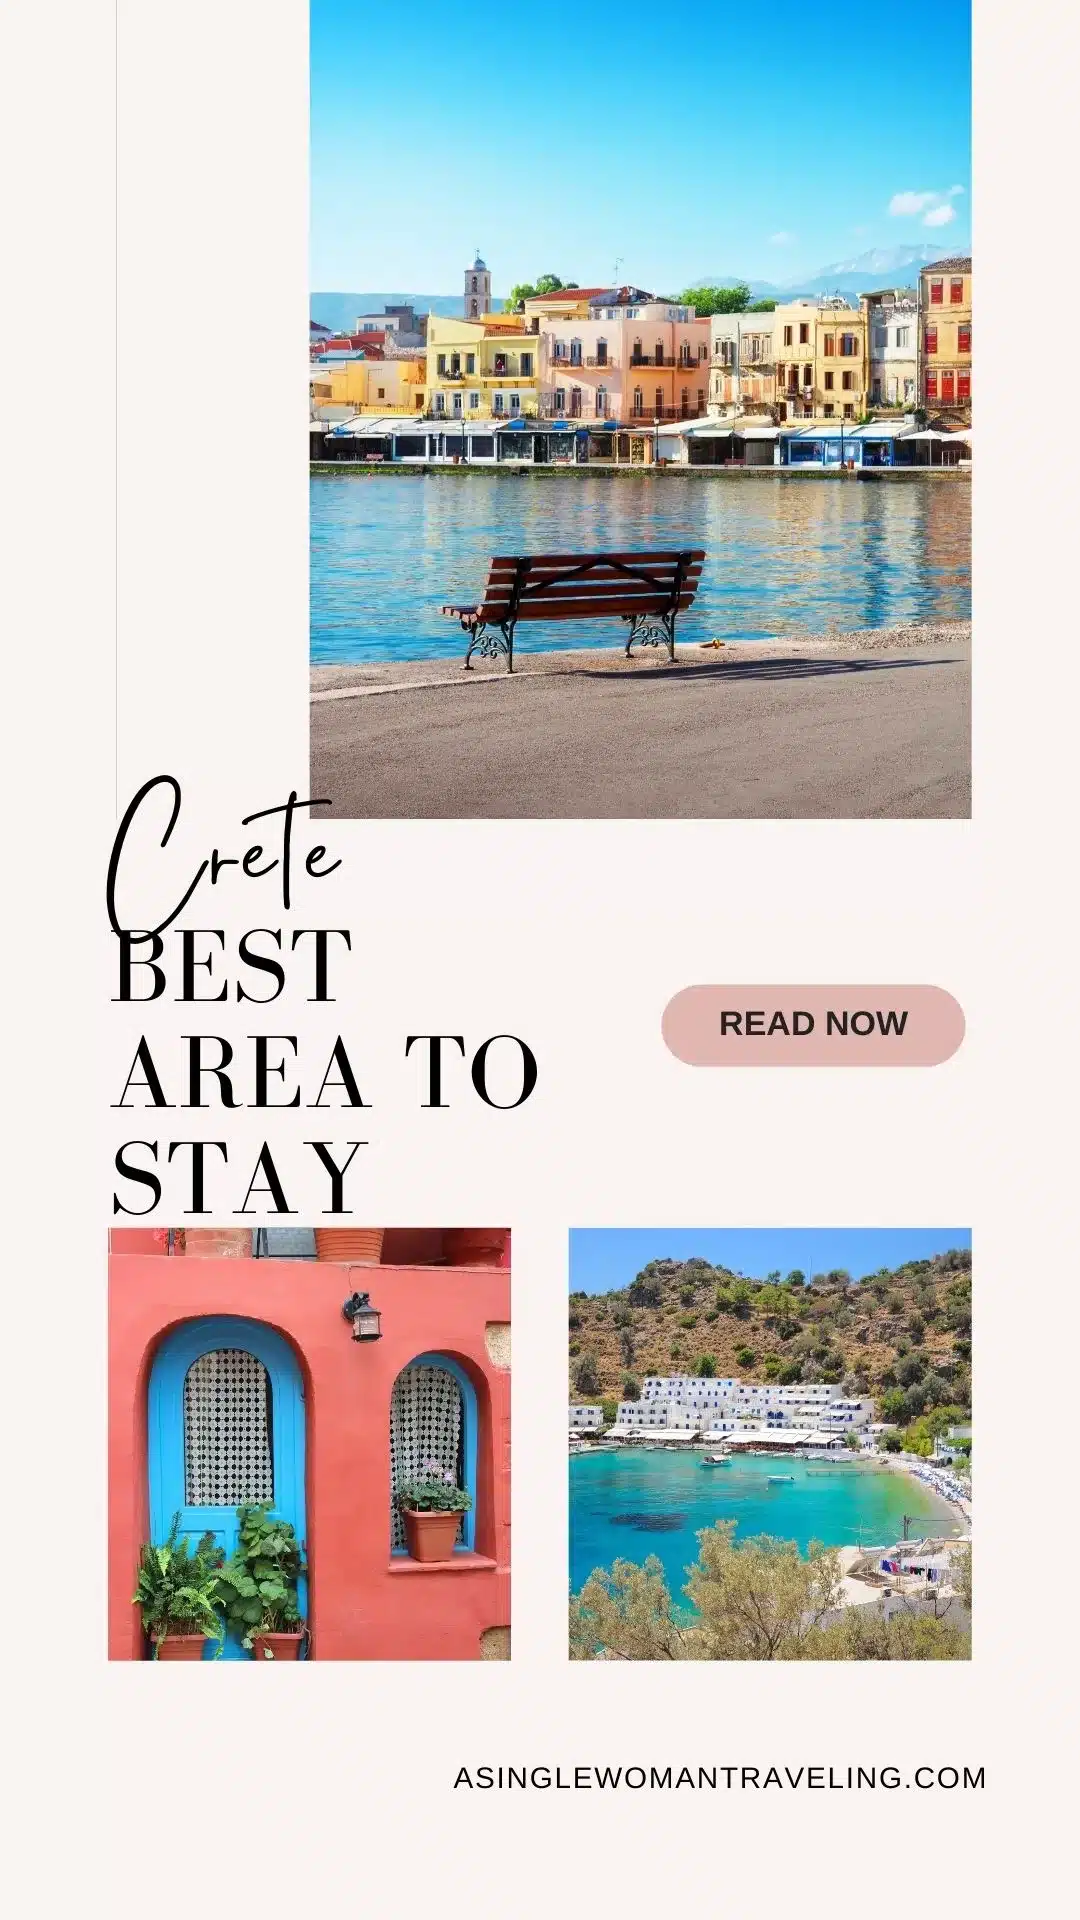 Best Area To Stay in Crete